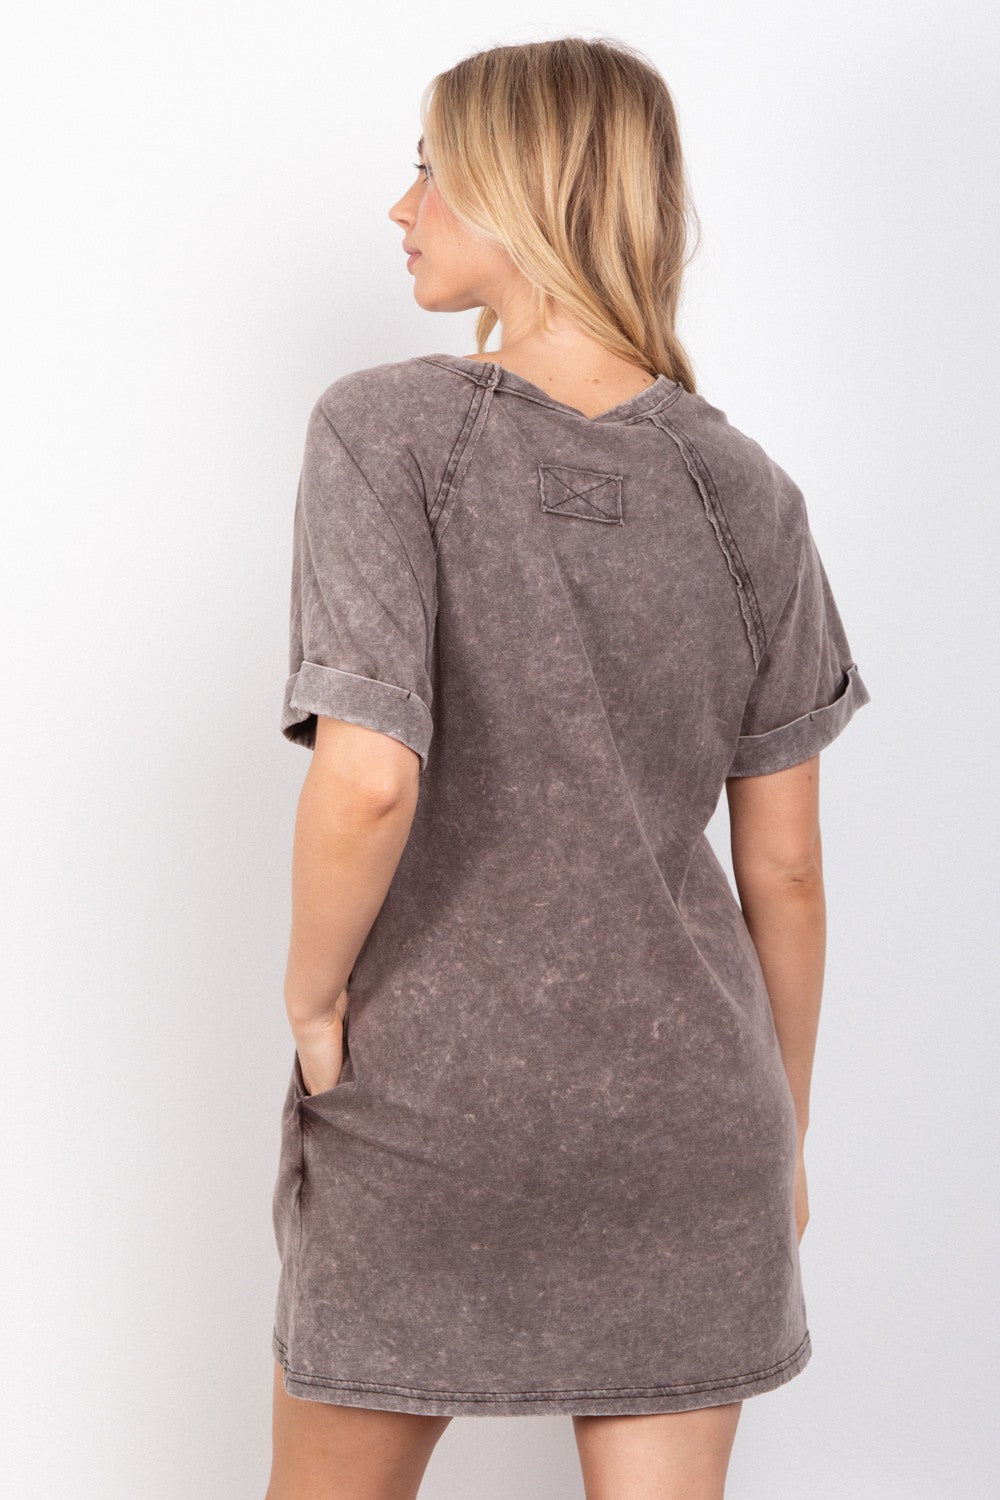 Mineral Washed Round Neck Mini Tee Dress